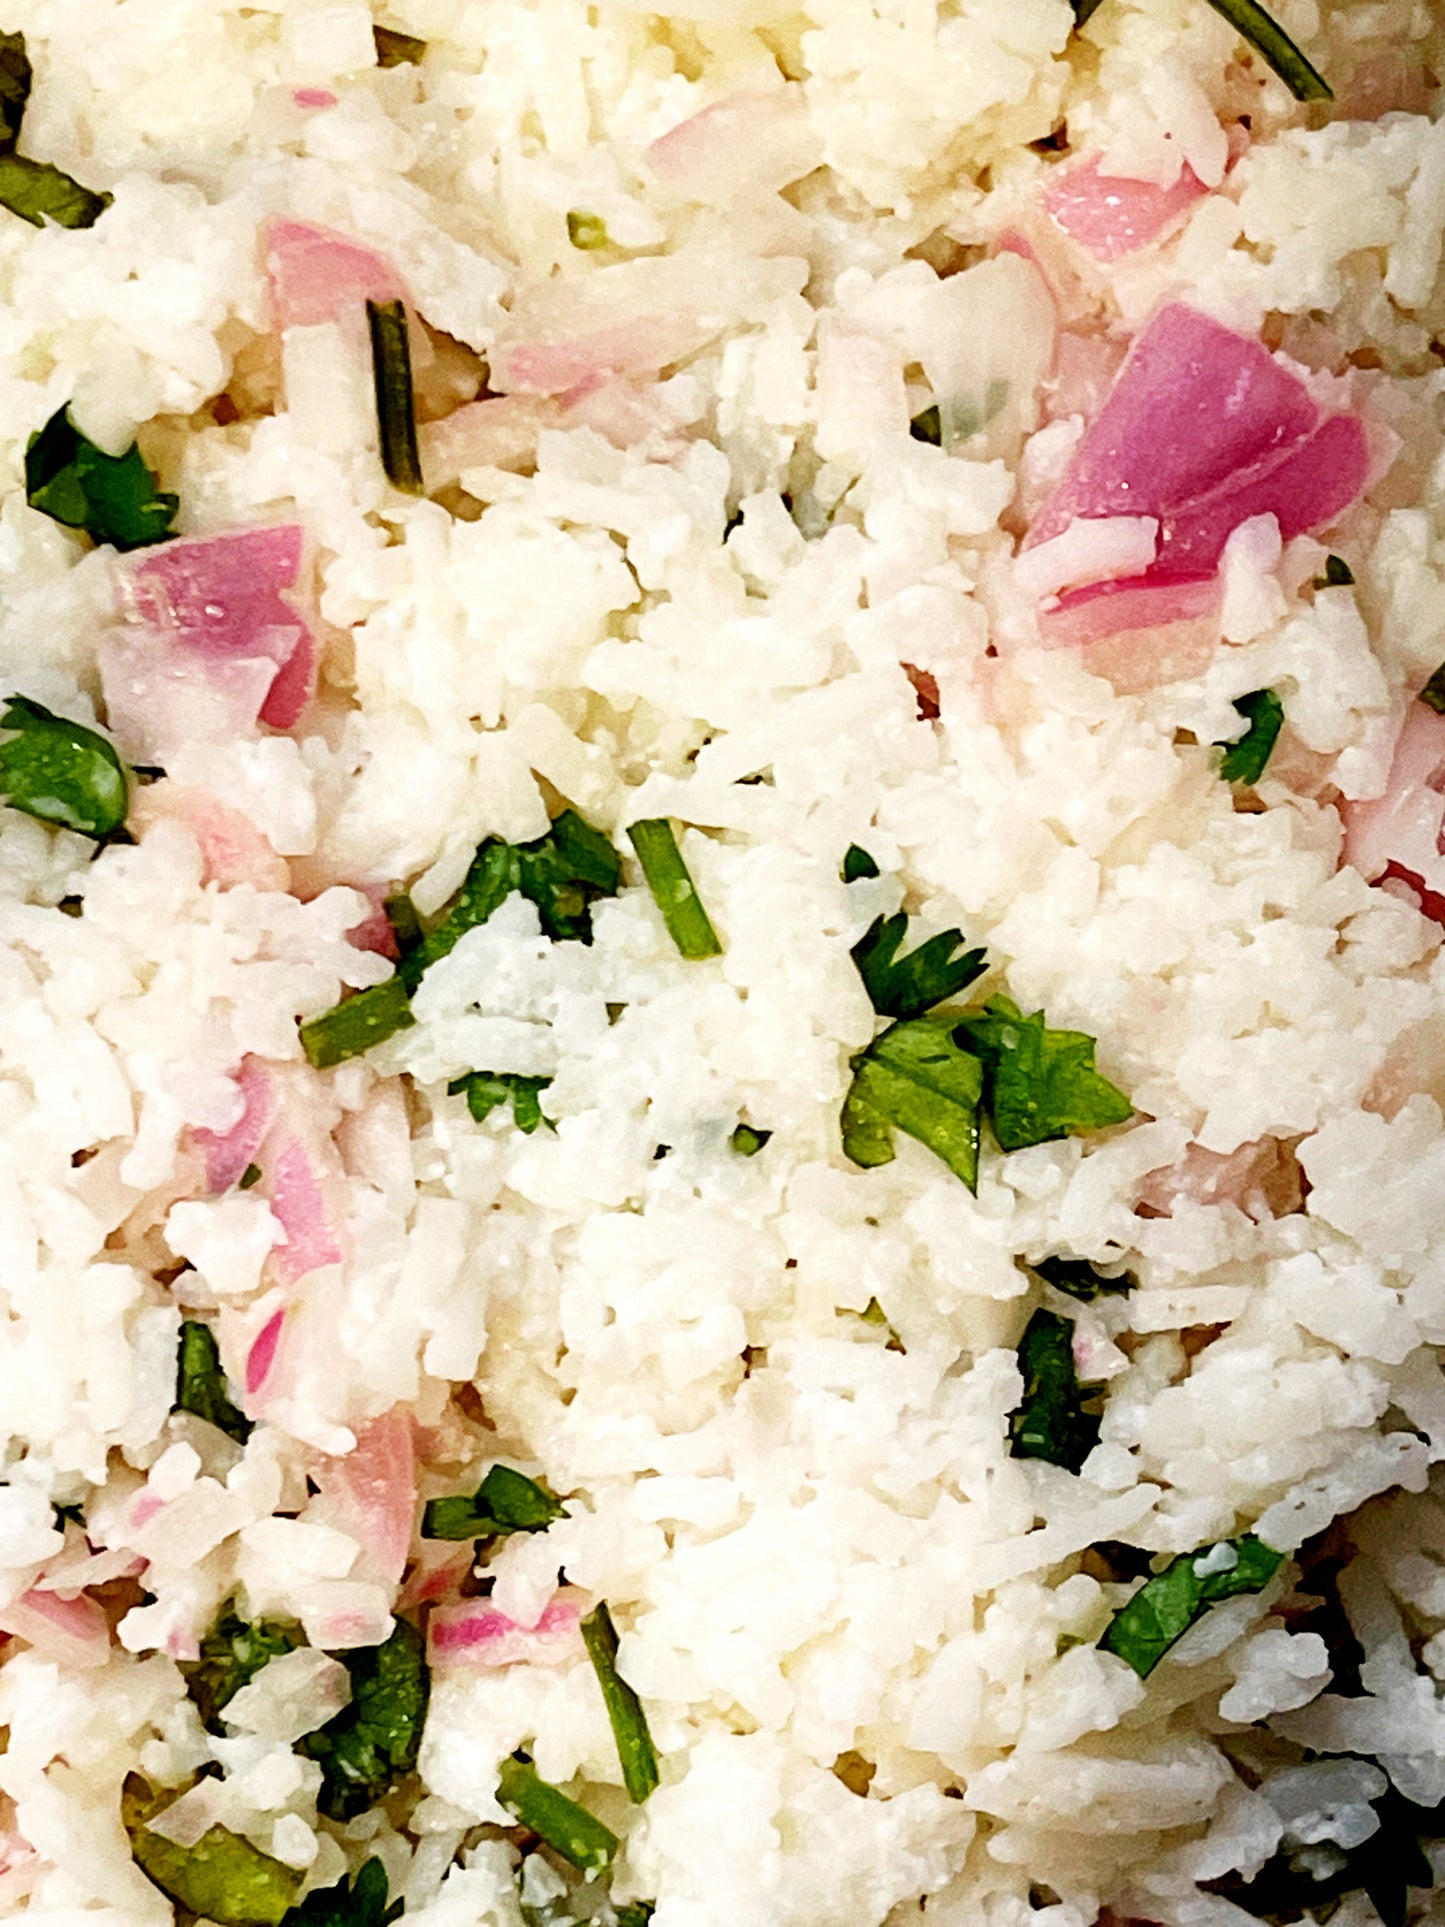 Fermented Rice - Subscription